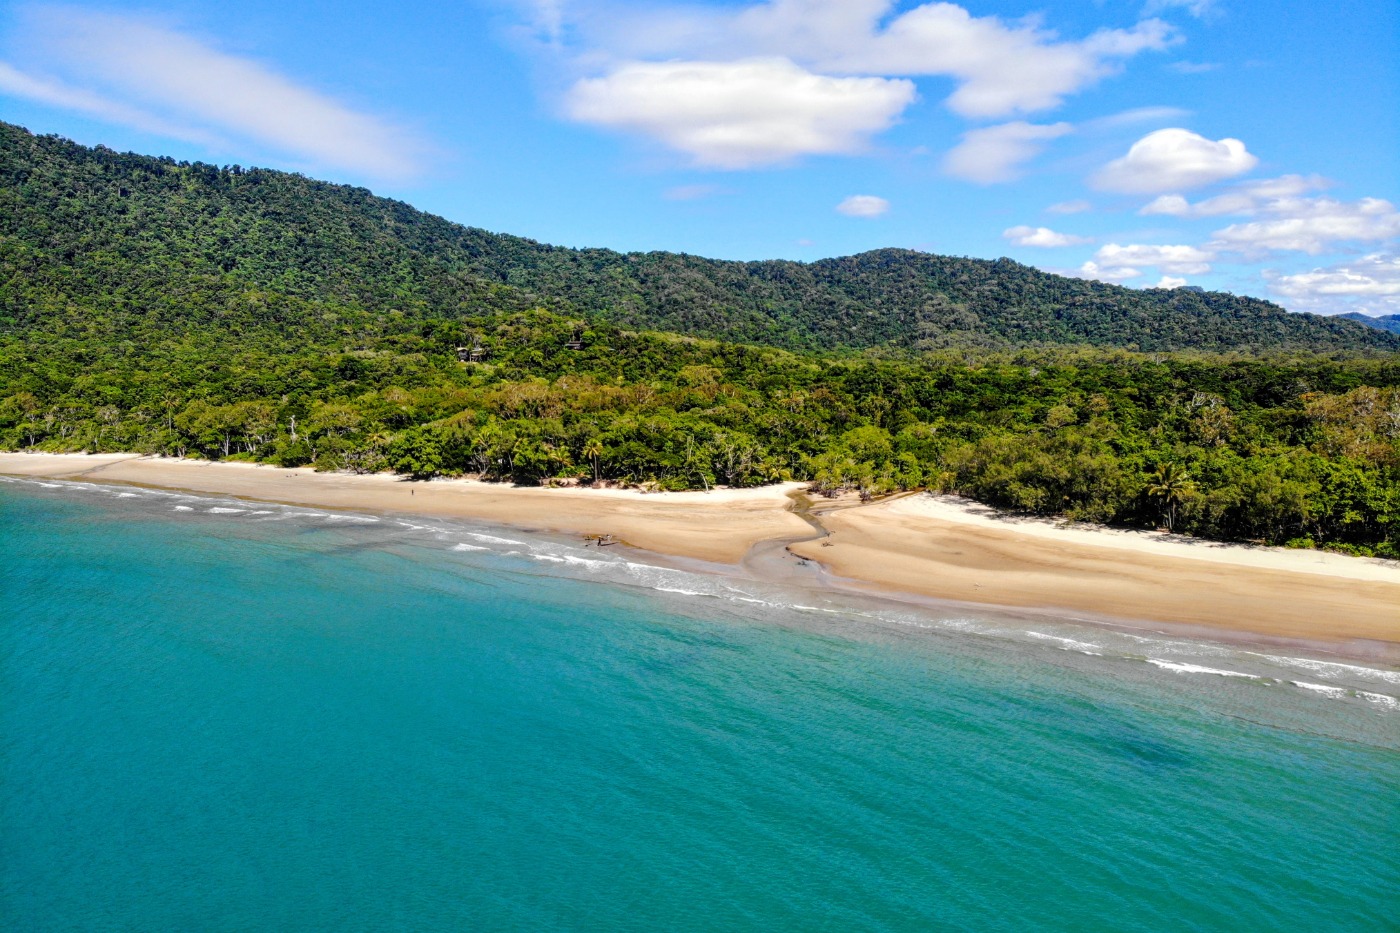 Visit the Daintree and Cape Tribulation from Port Douglas